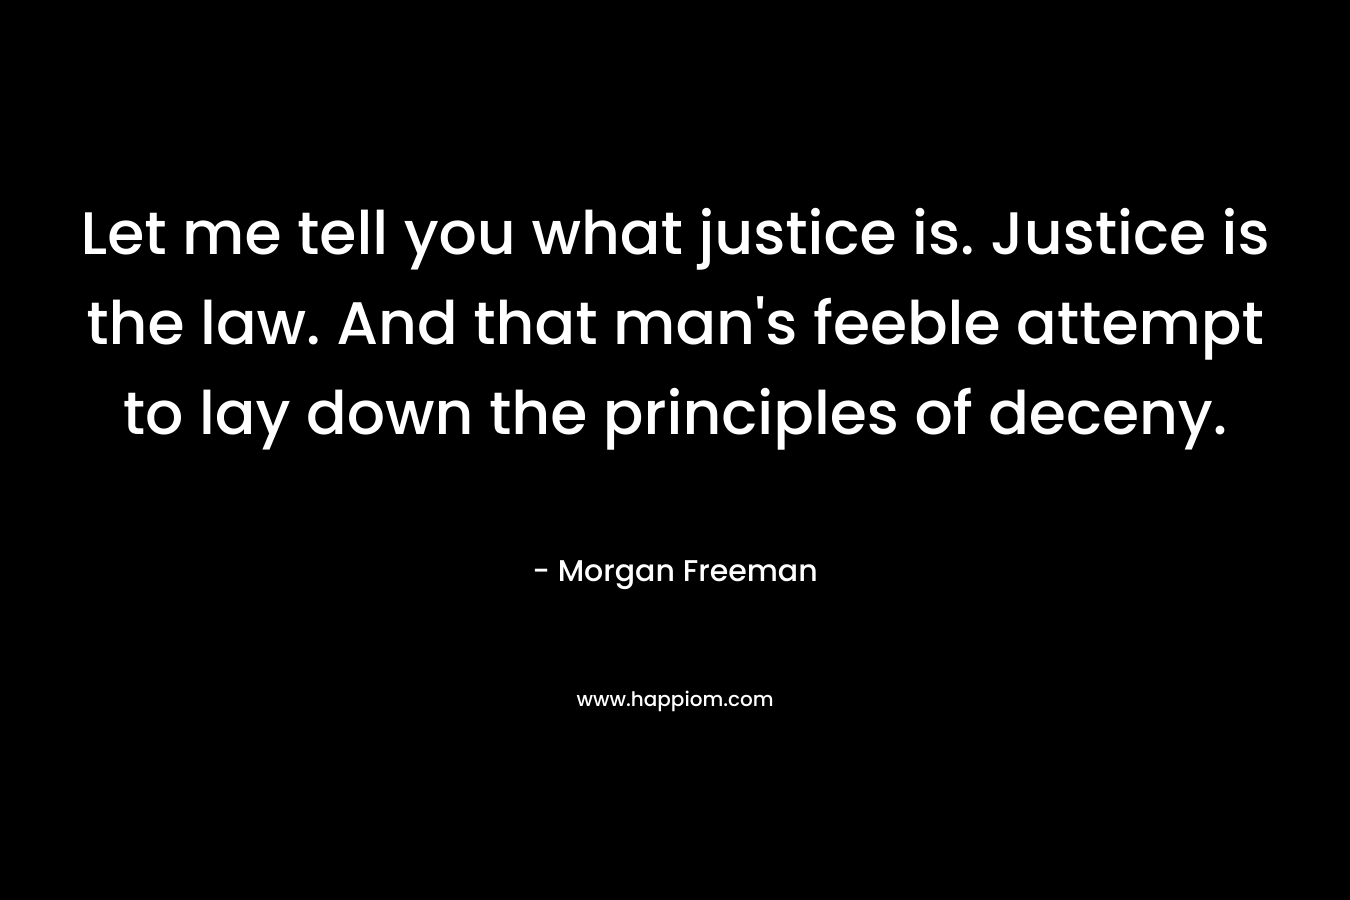 Let me tell you what justice is. Justice is the law. And that man's feeble attempt to lay down the principles of deceny.